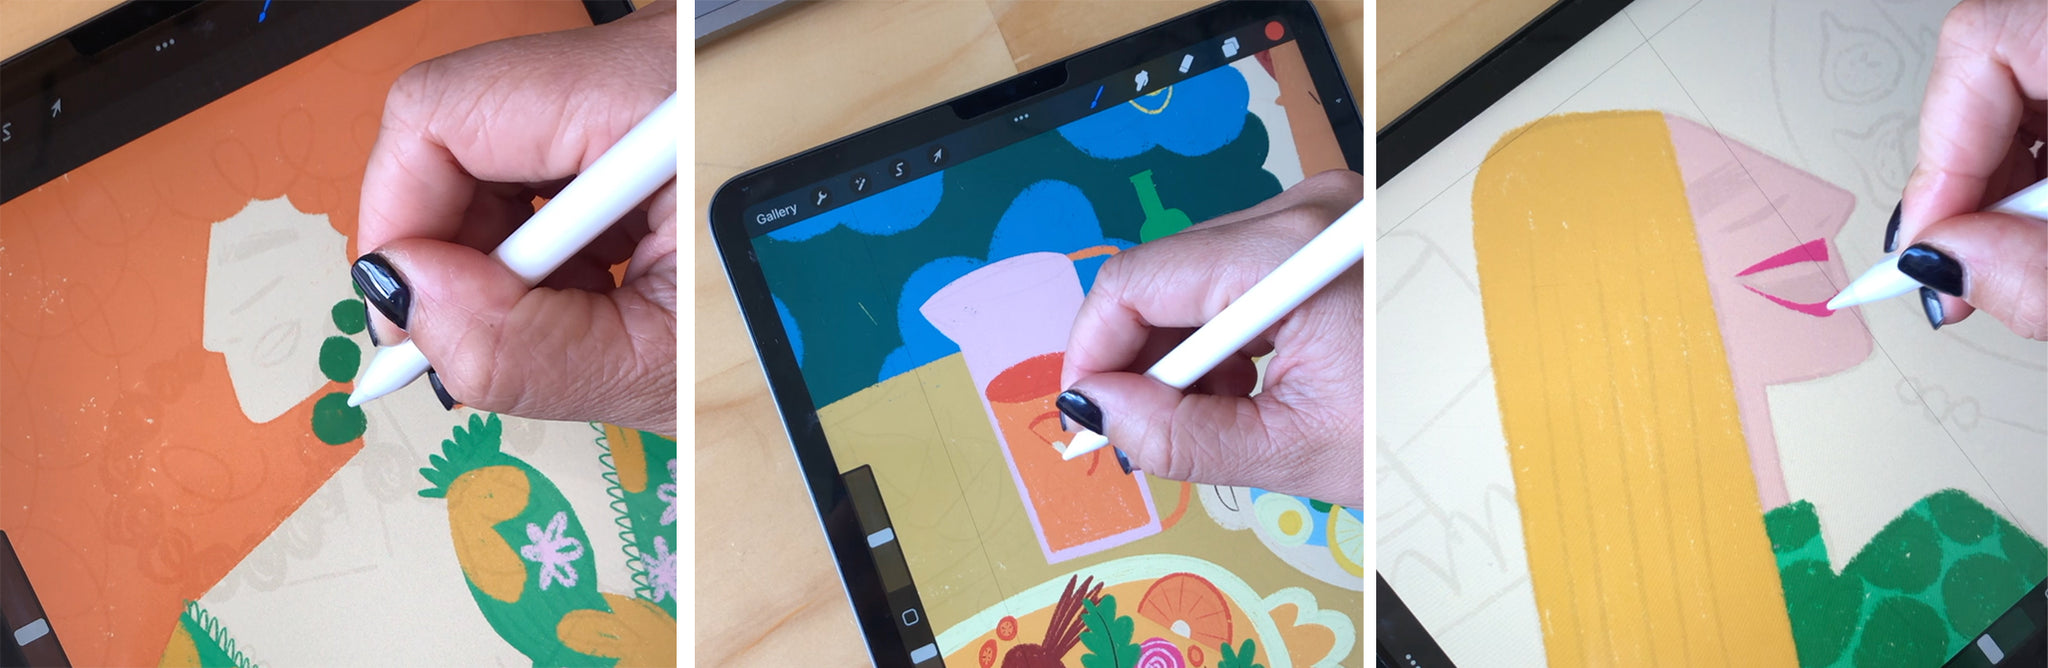 Jigsaw Puzzle in the making, artwork by NZ artist Hope McConnell. Fashionable ladies and tasty food. Ipad digital artwork in the making.